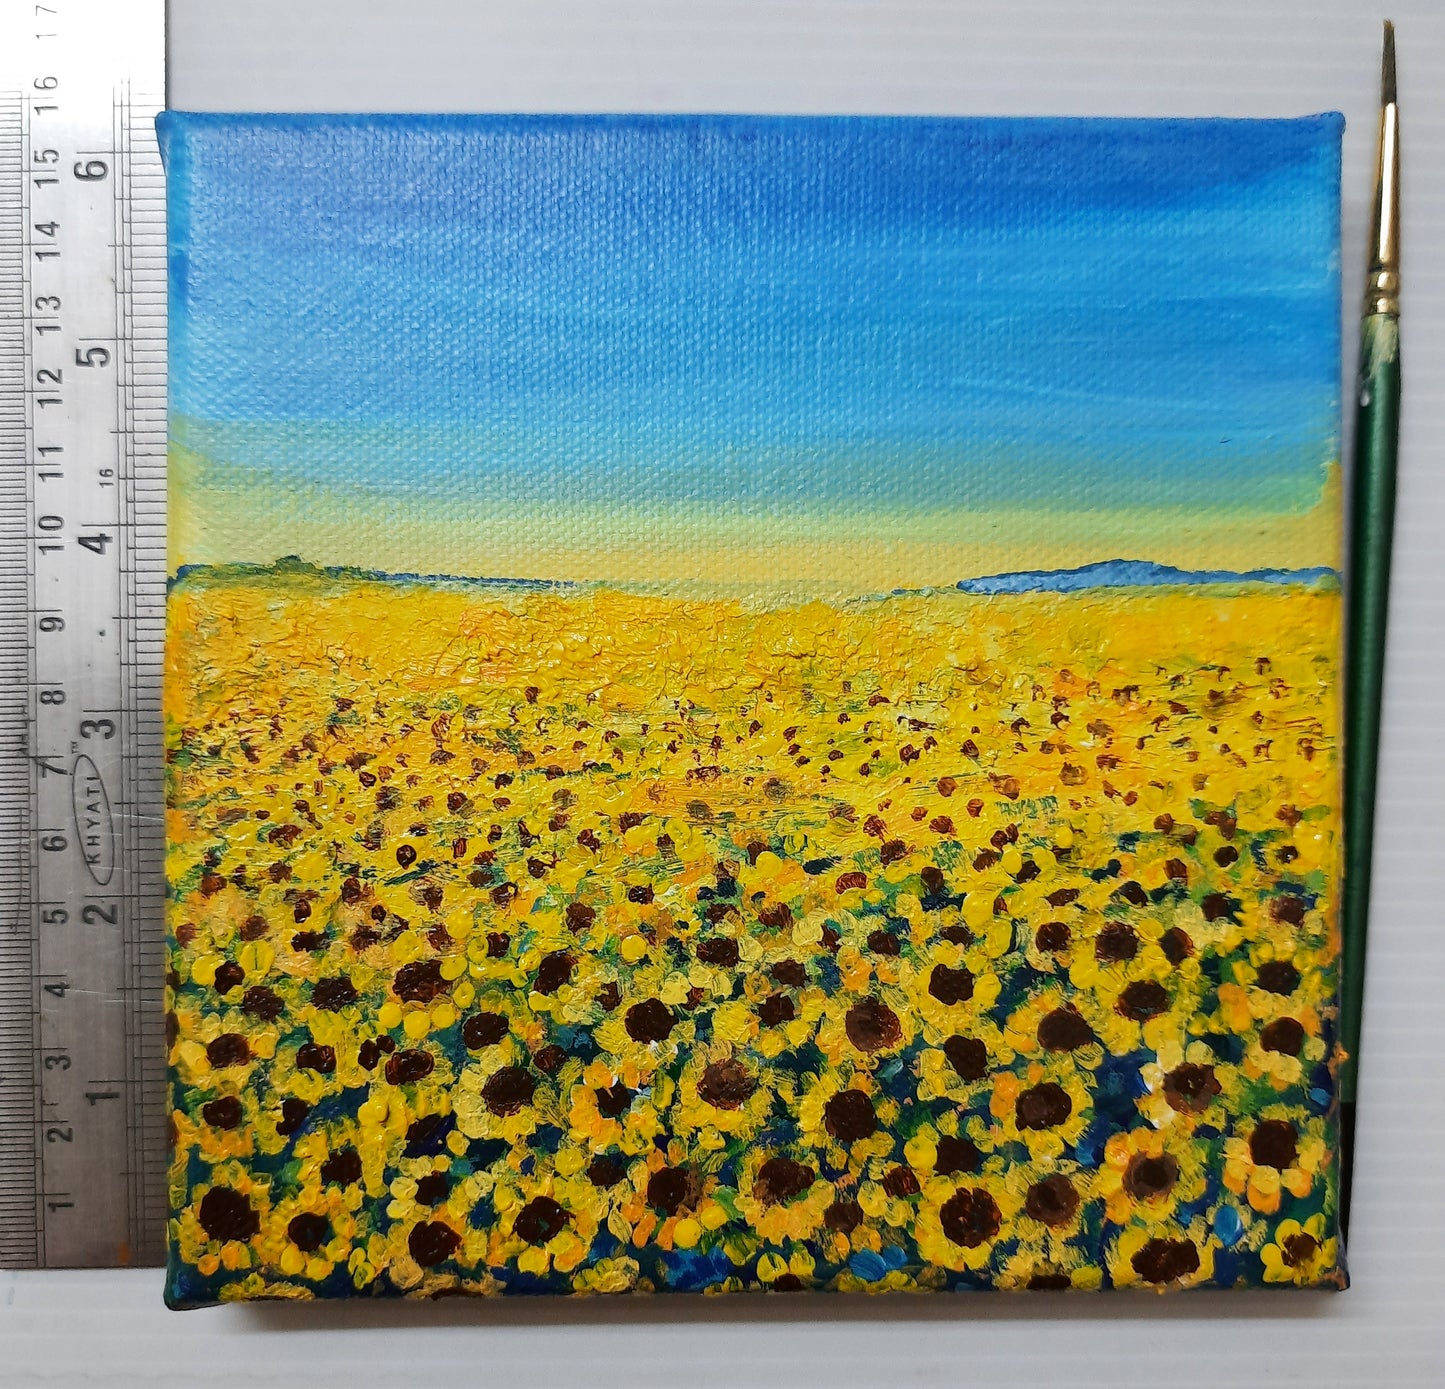 Studio view, Sunflower fields in summer, Miniature landscape painting on canvas